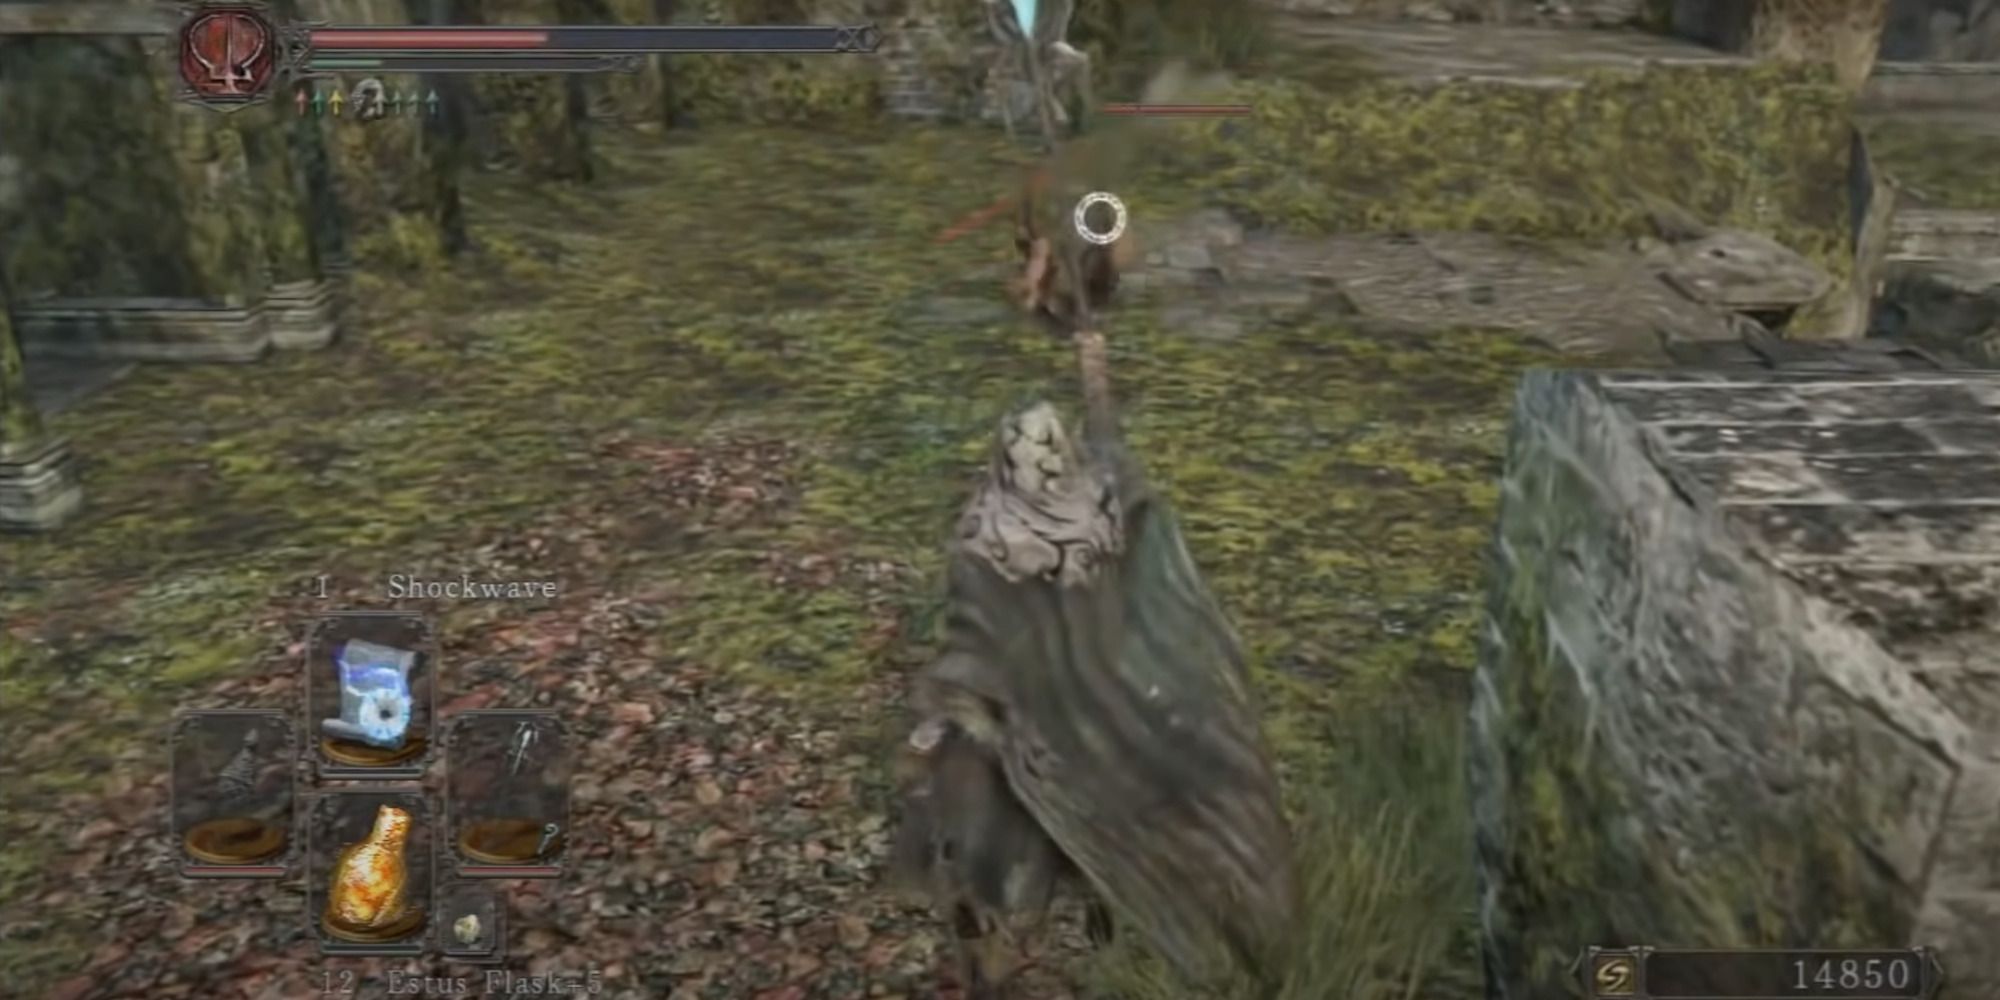 Player using the Shockwave Sorcery in Dark Souls 2 while wearing the Hexer's Hood and using the Staff of Wisdom